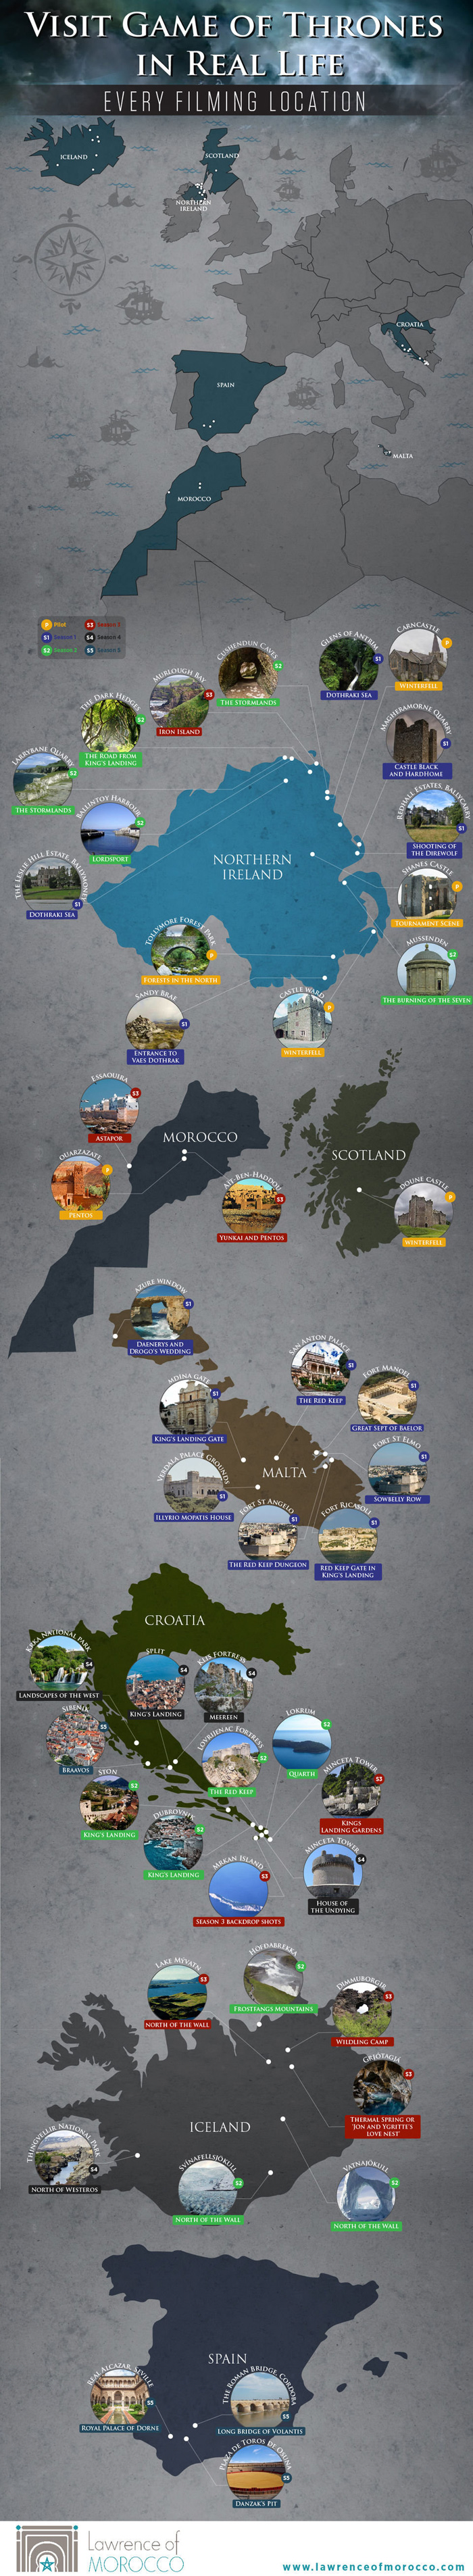 A Map of Every Game of Thrones Filming Location